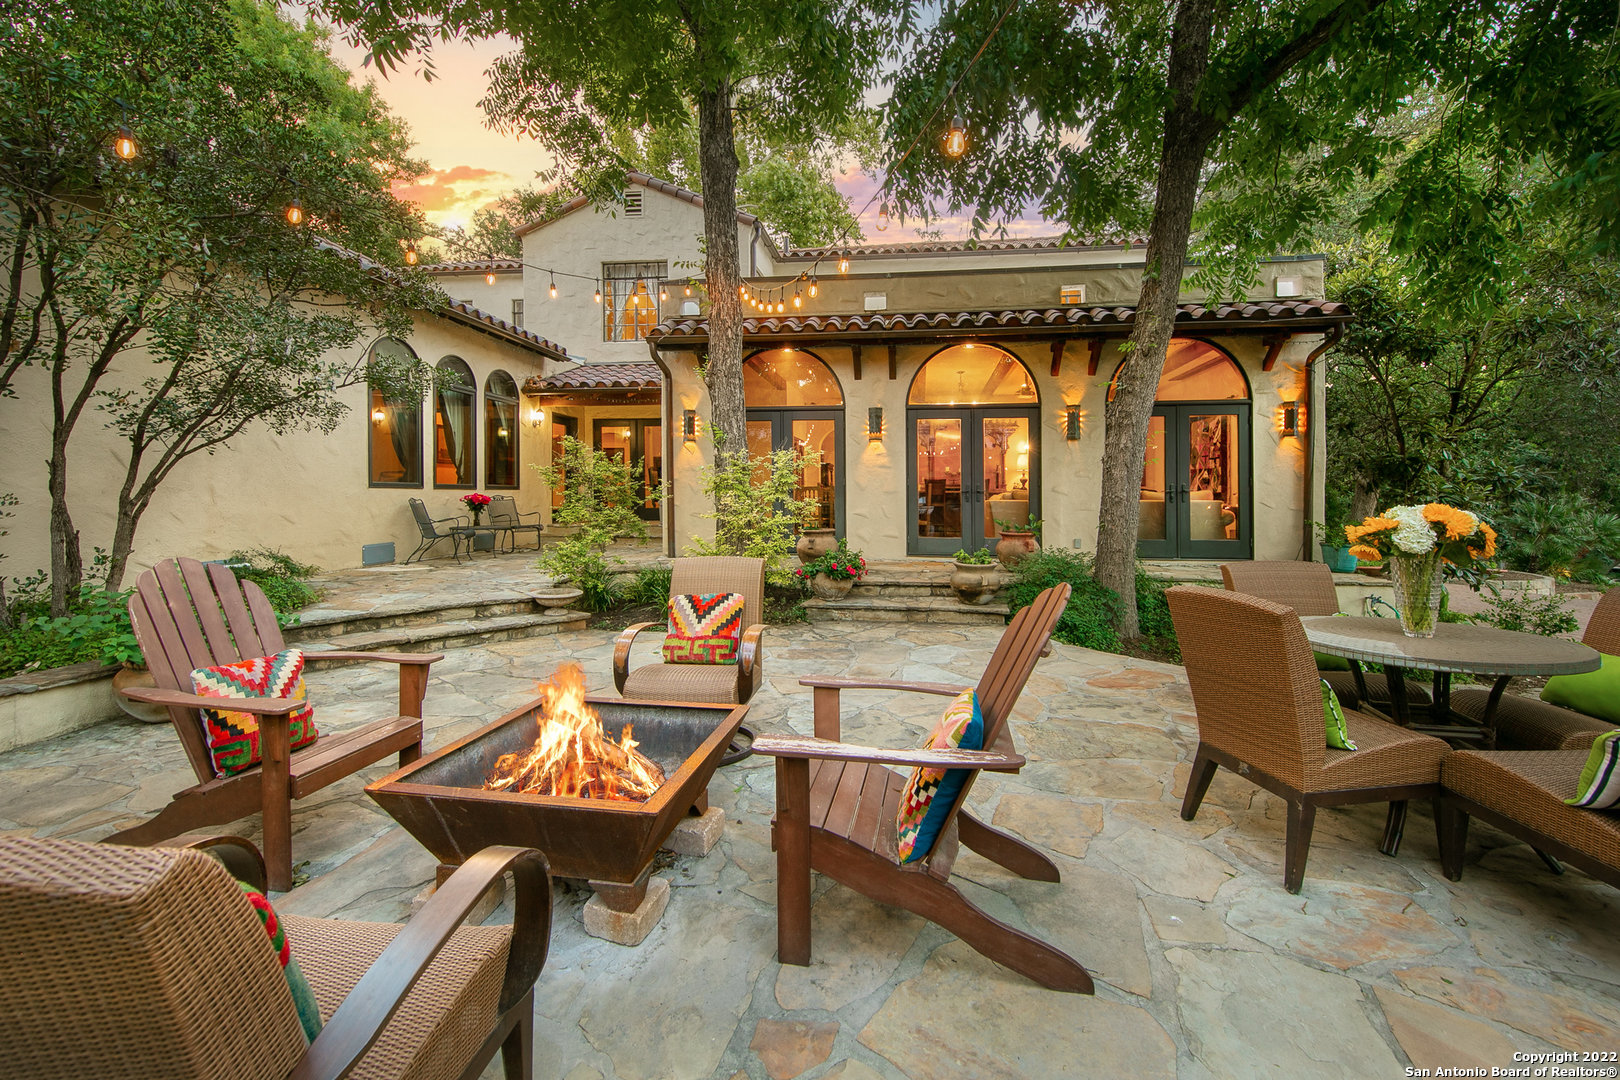 a backyard of a house with outdoor seating